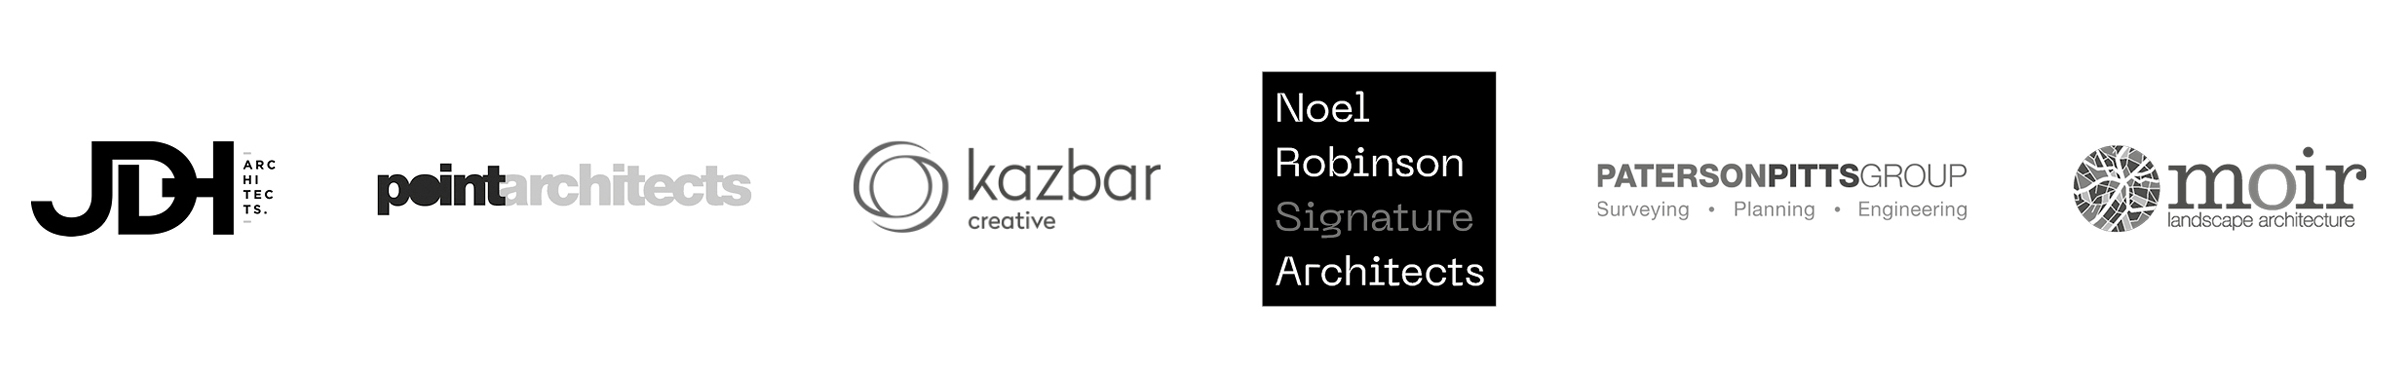 Architects + Designers logo for Review website page - AU-1-1